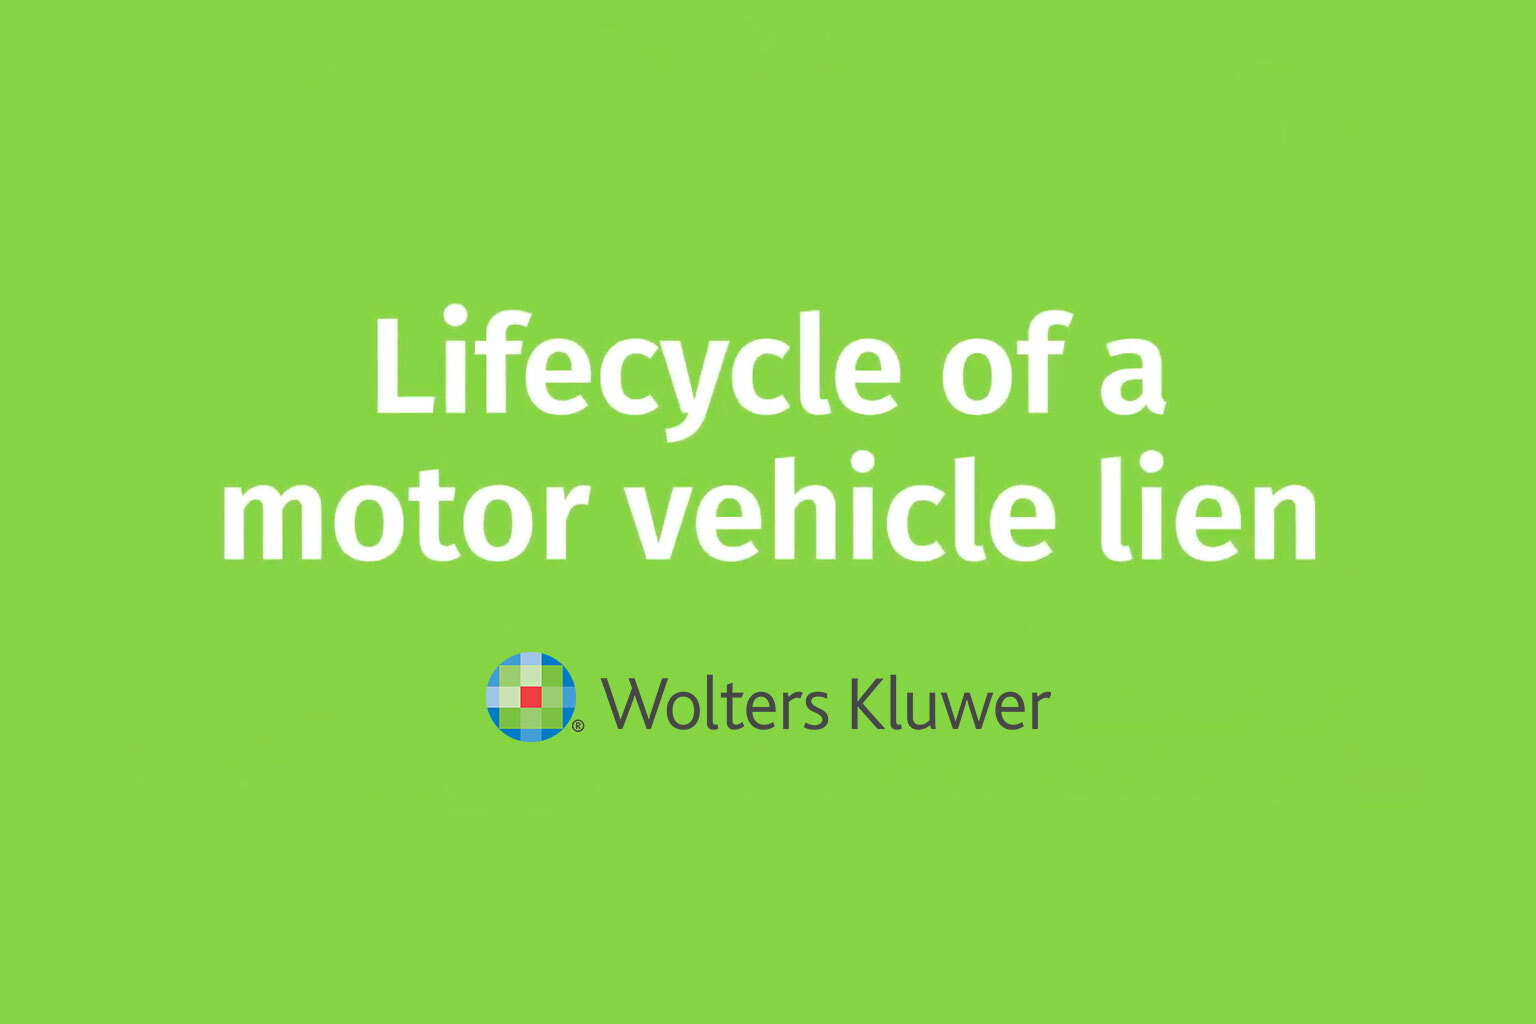 Lifecycle of a motor vehicle lien